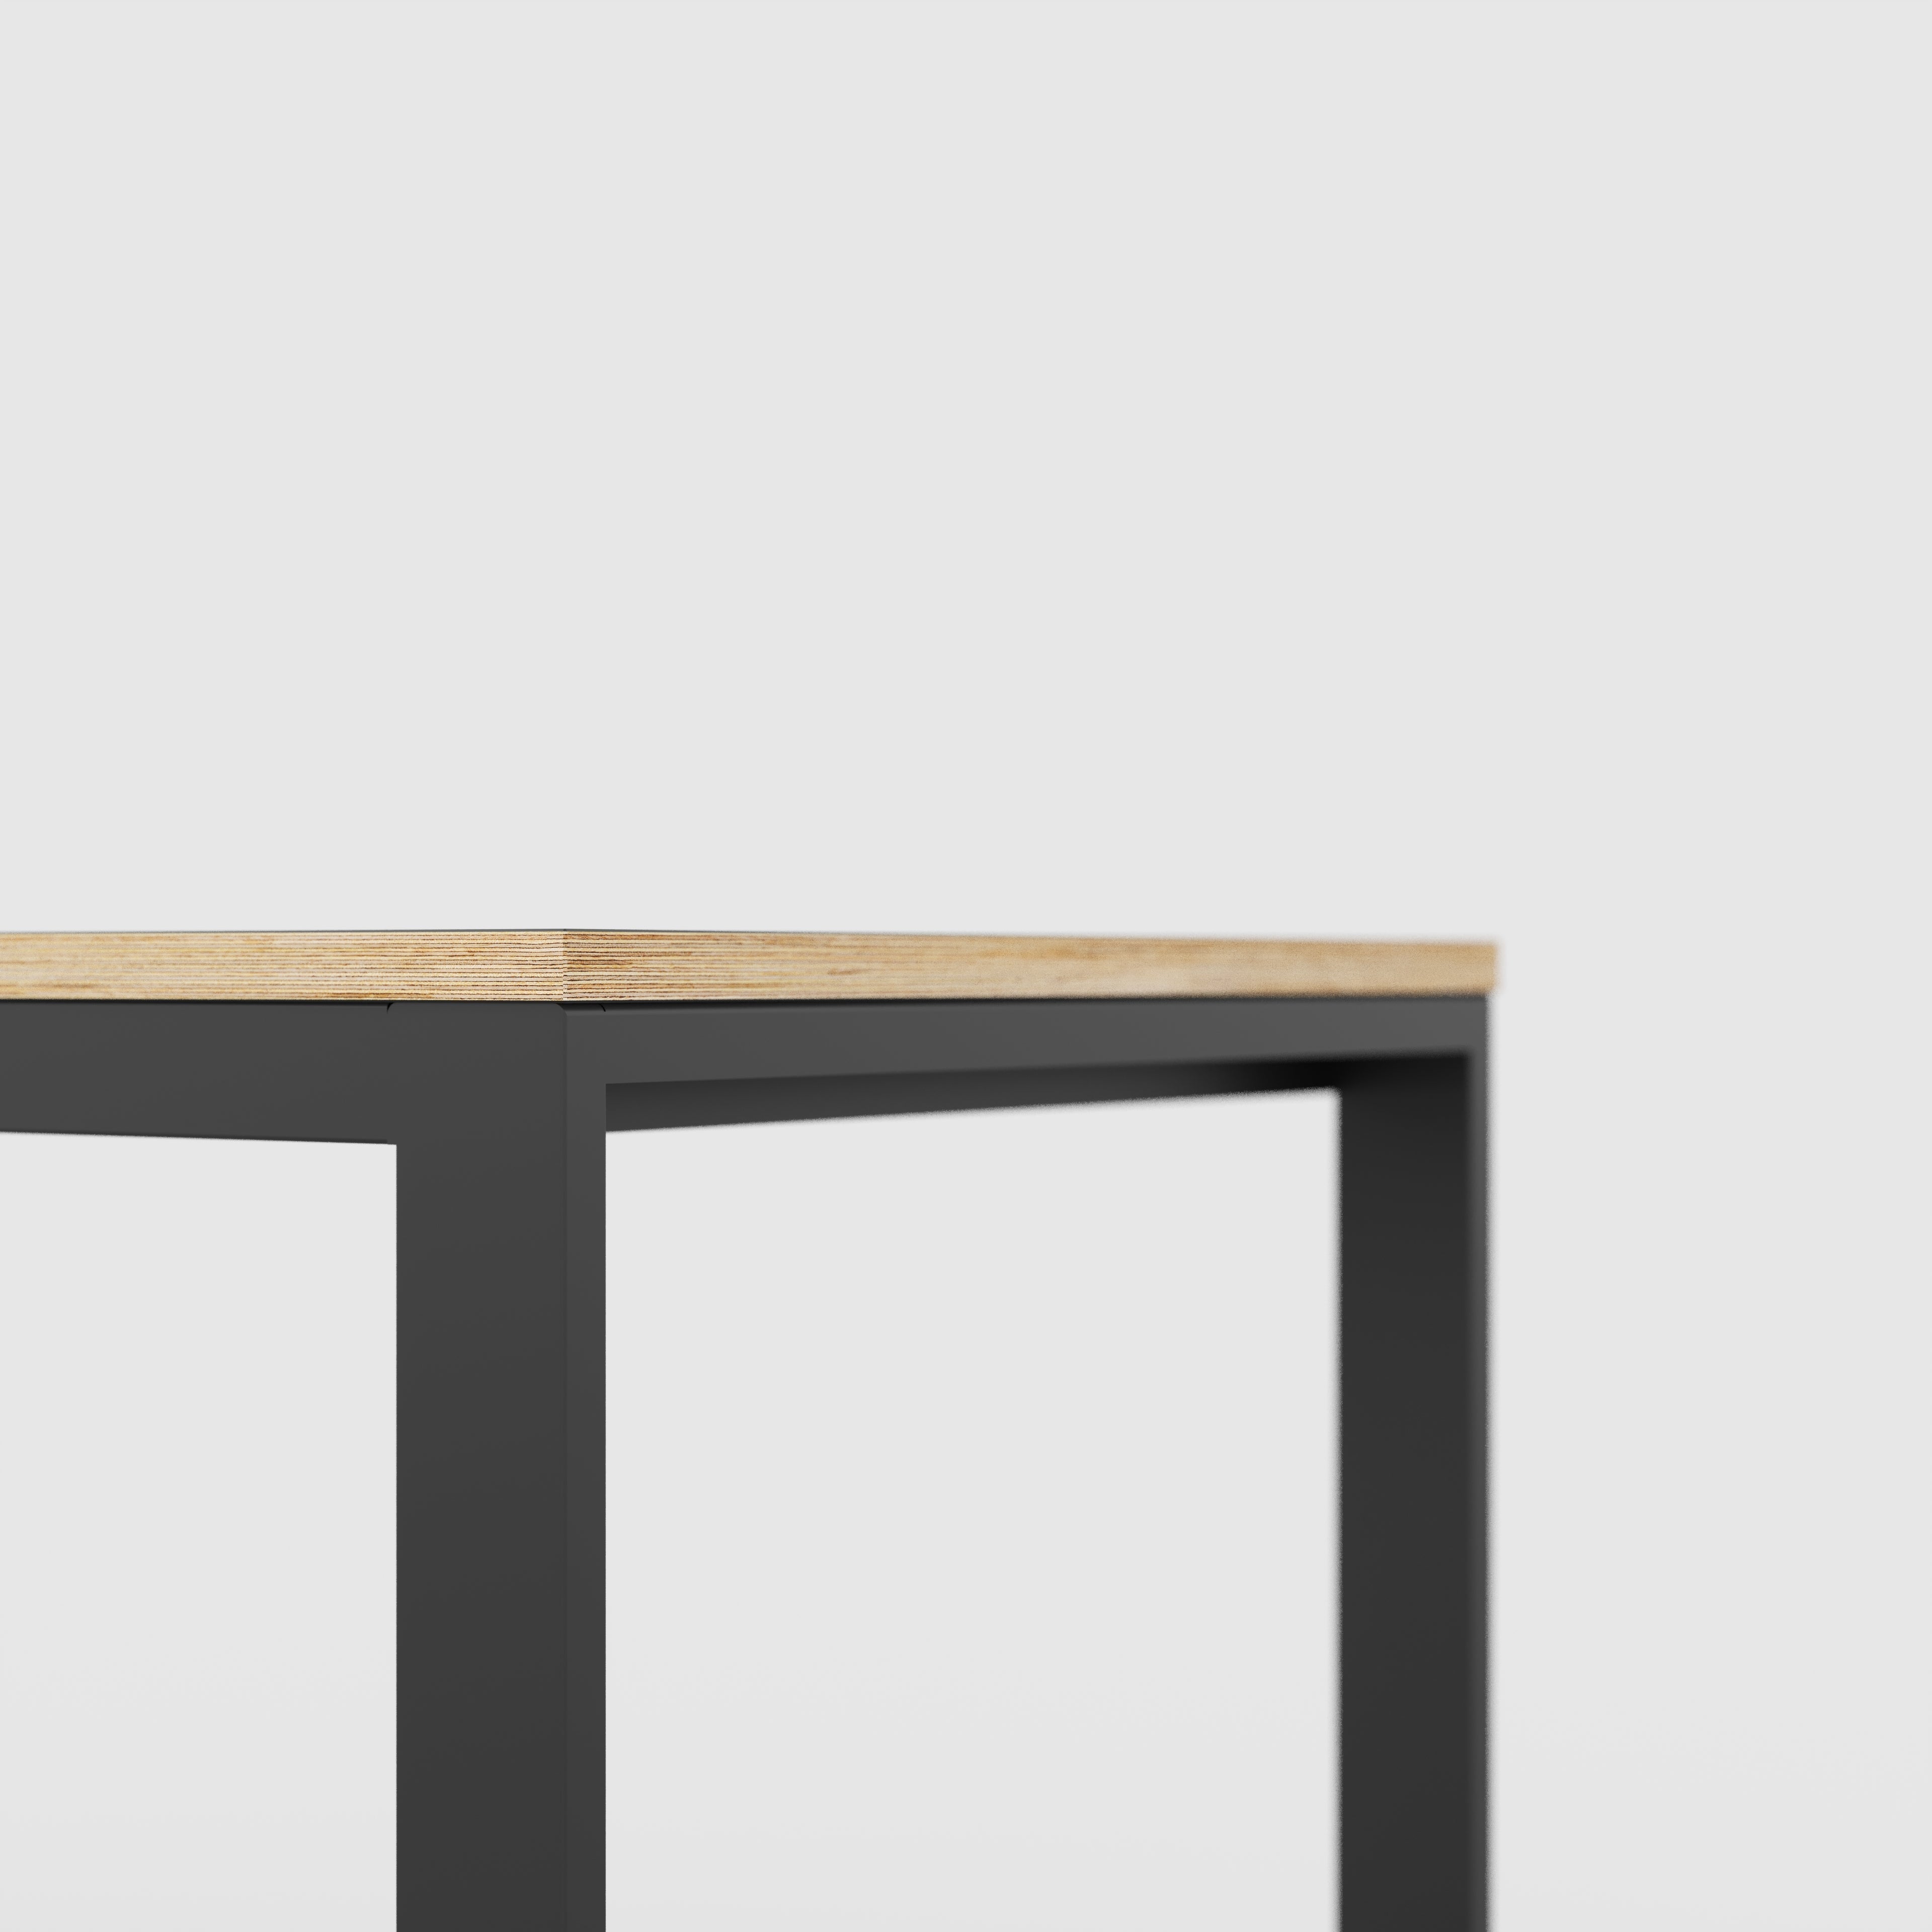 Table with Black Industrial Frame - Plywood Oak - 2400(w) x 745(d) x 735(h)